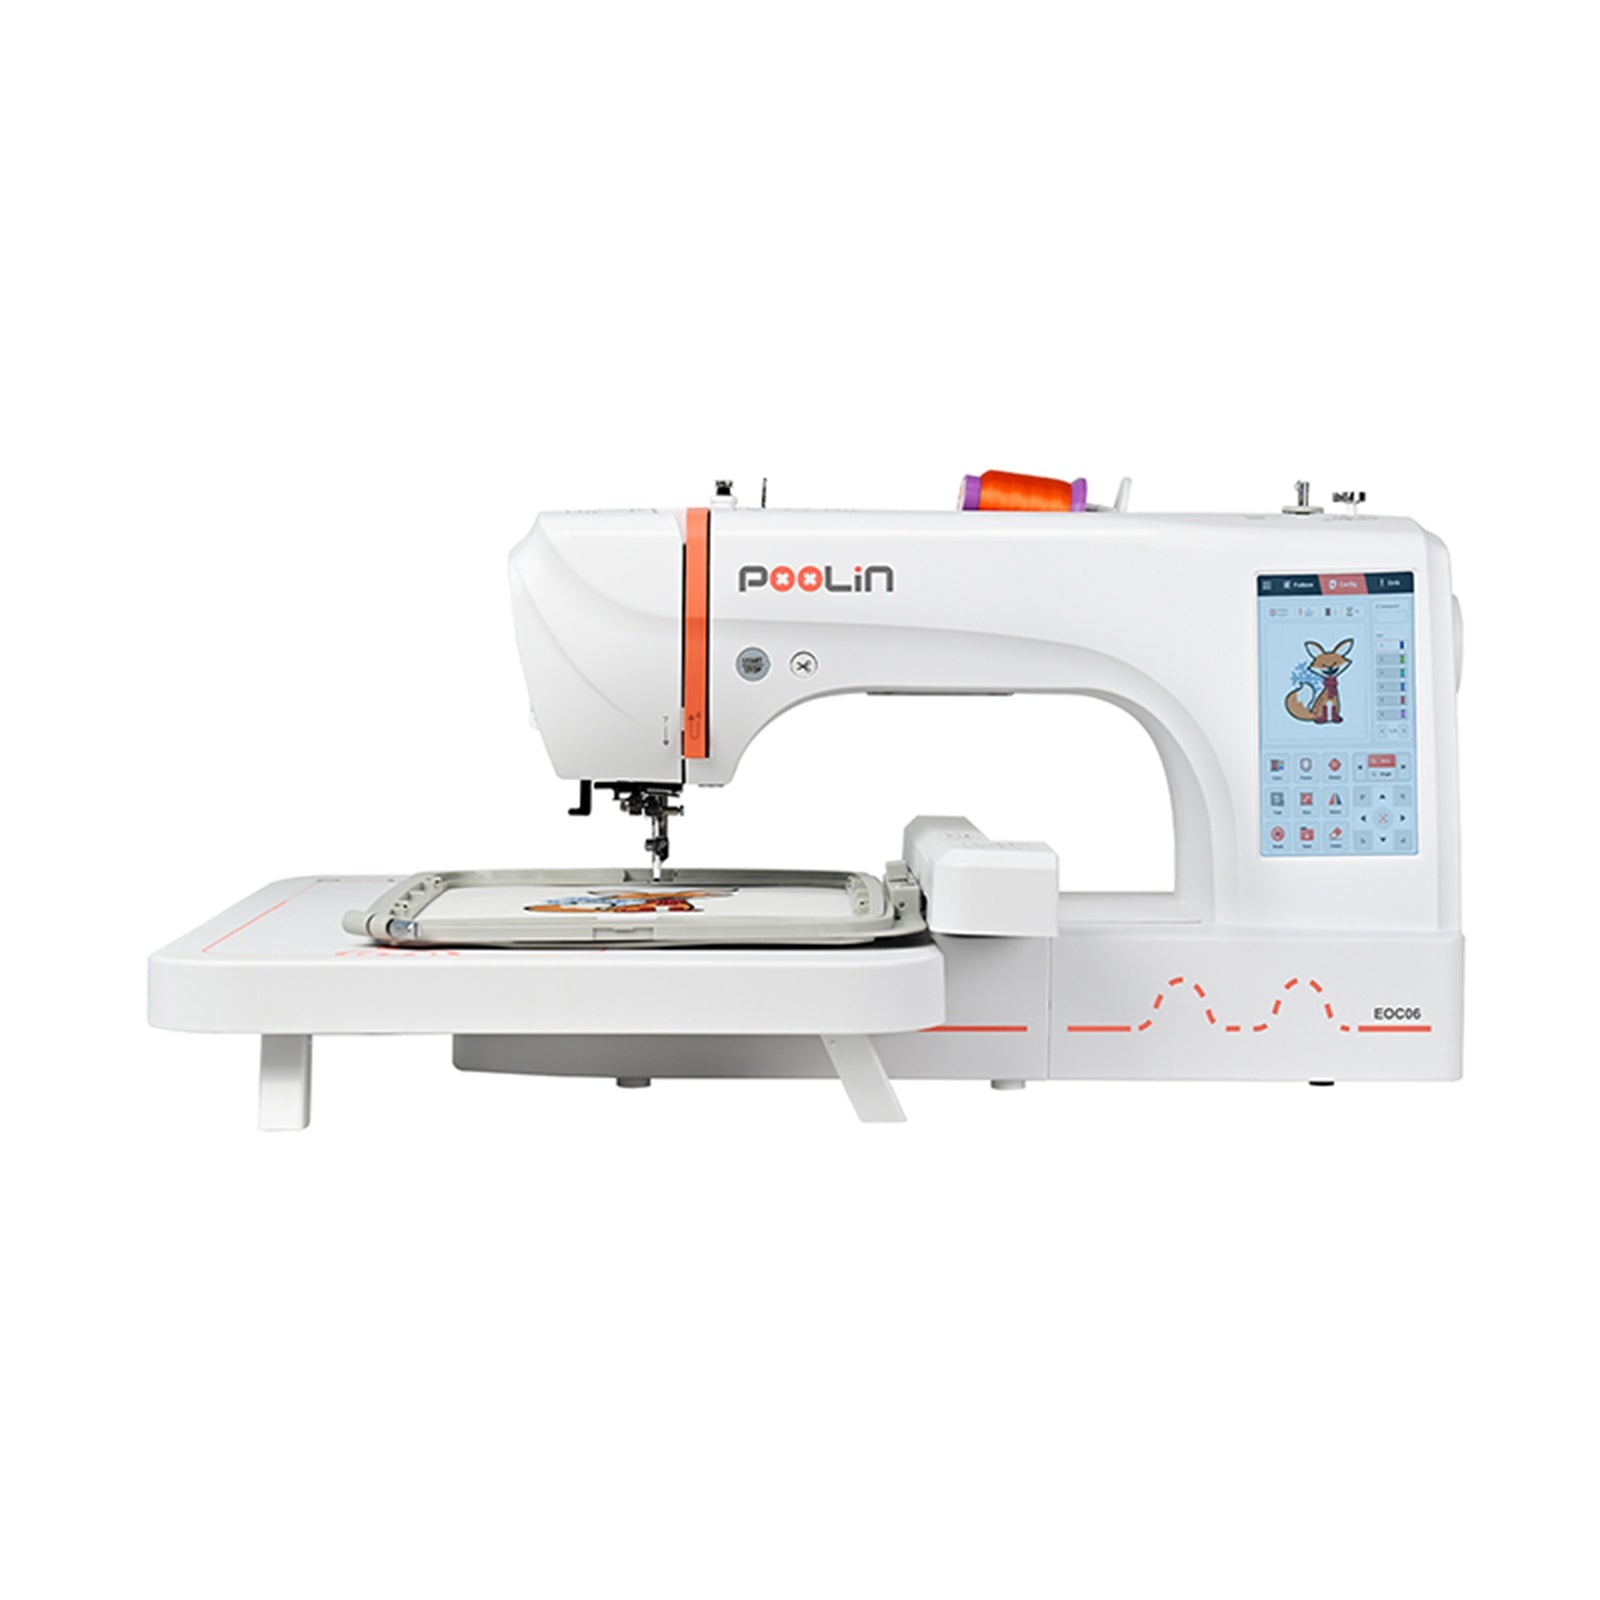 EOC06 Newest Computerized Homeuse Embroidery Machine 4-7 Days Free Shipping